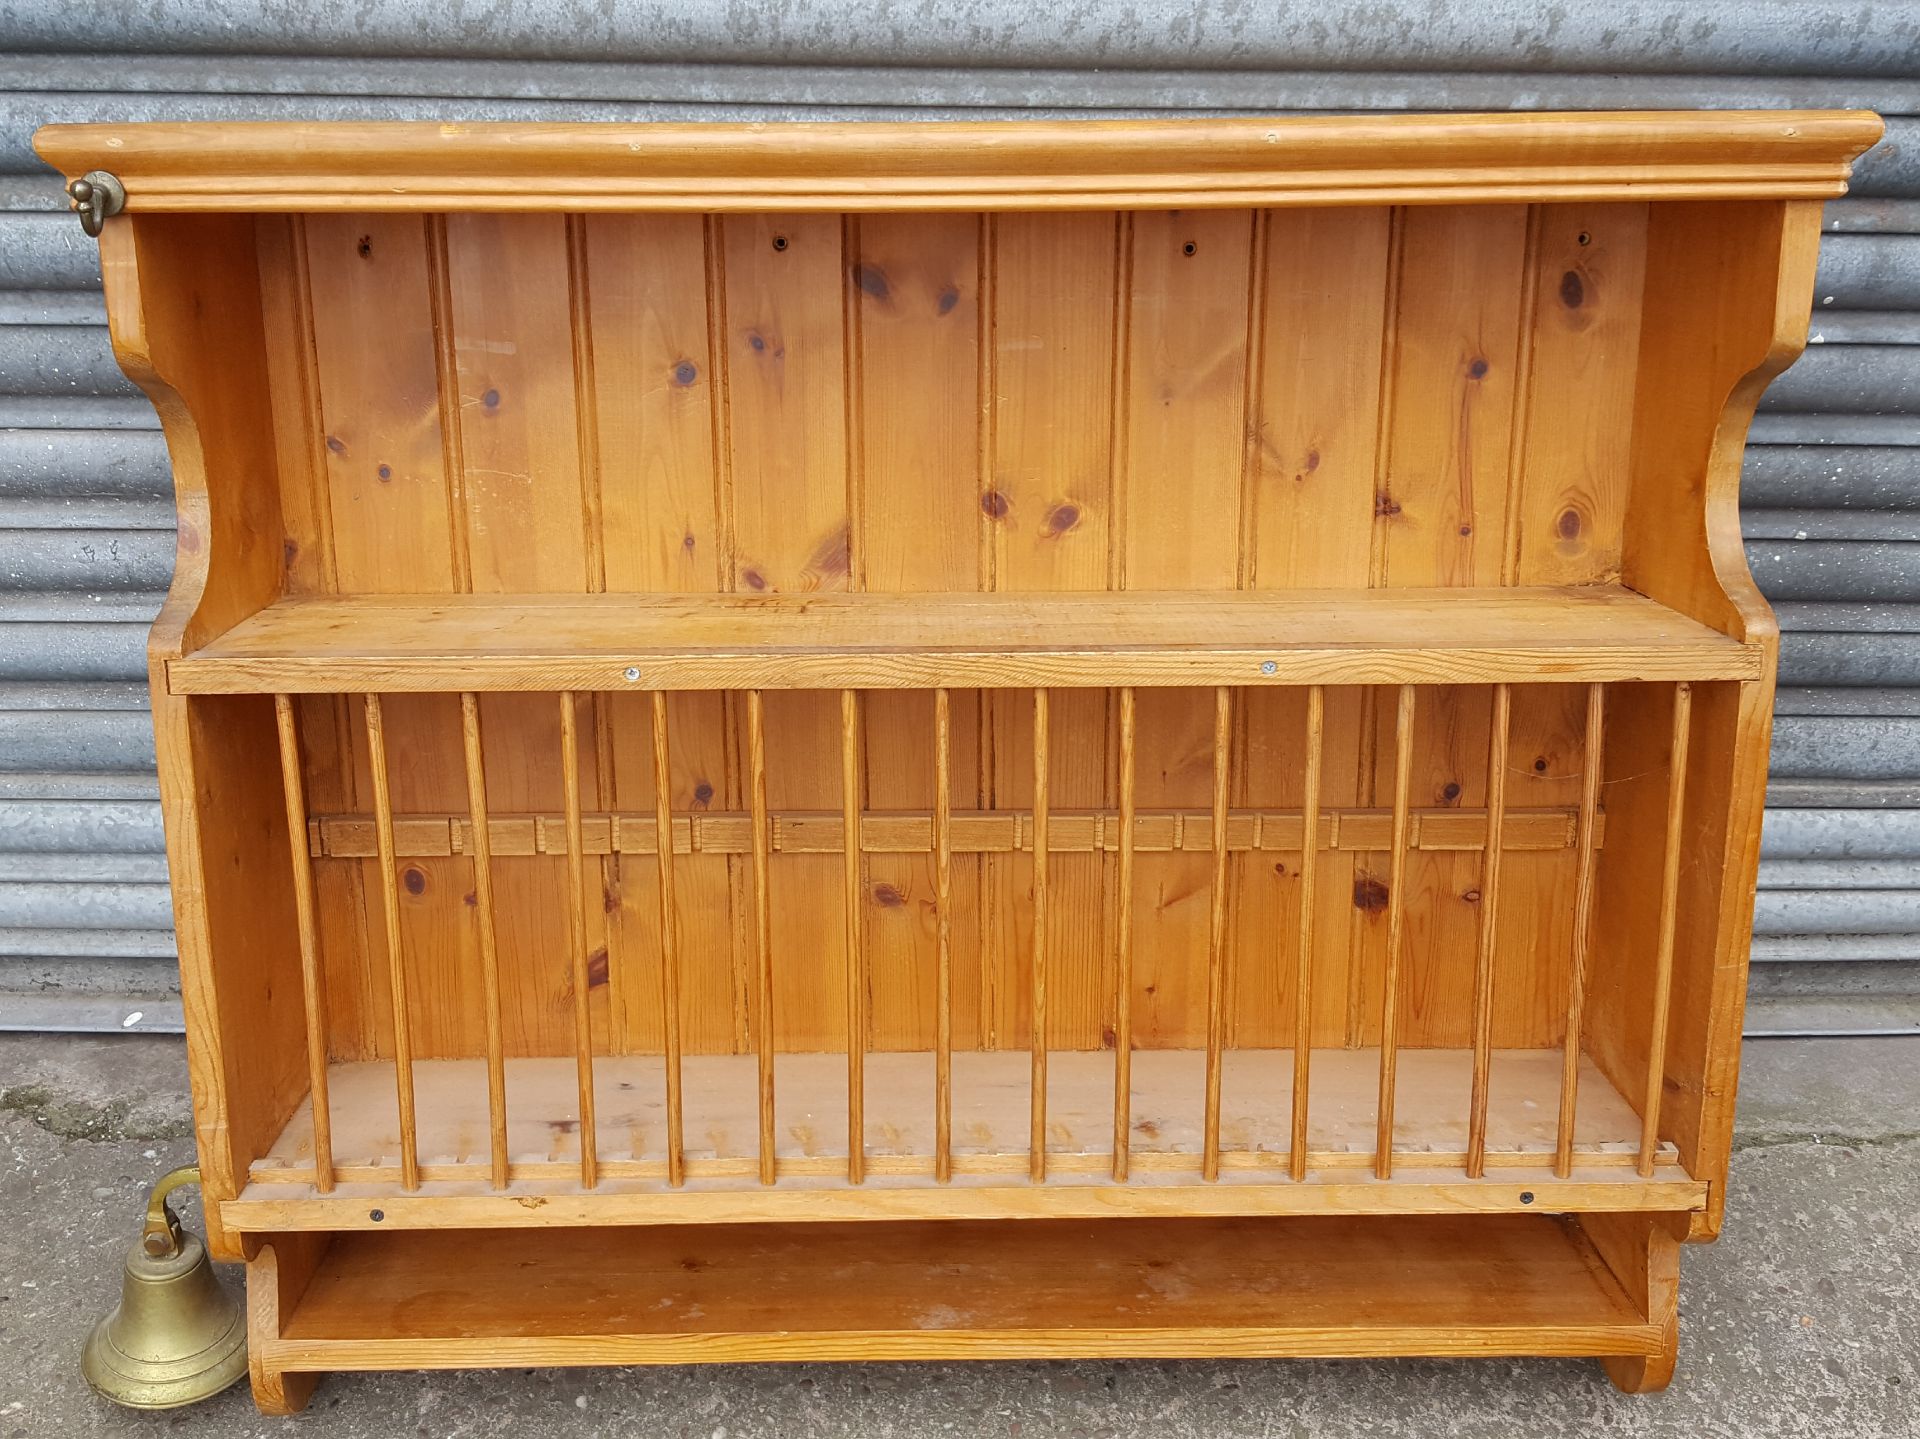 Vintage Retro Pine Wall Plate Rack & Shelves (Bell in image not included)